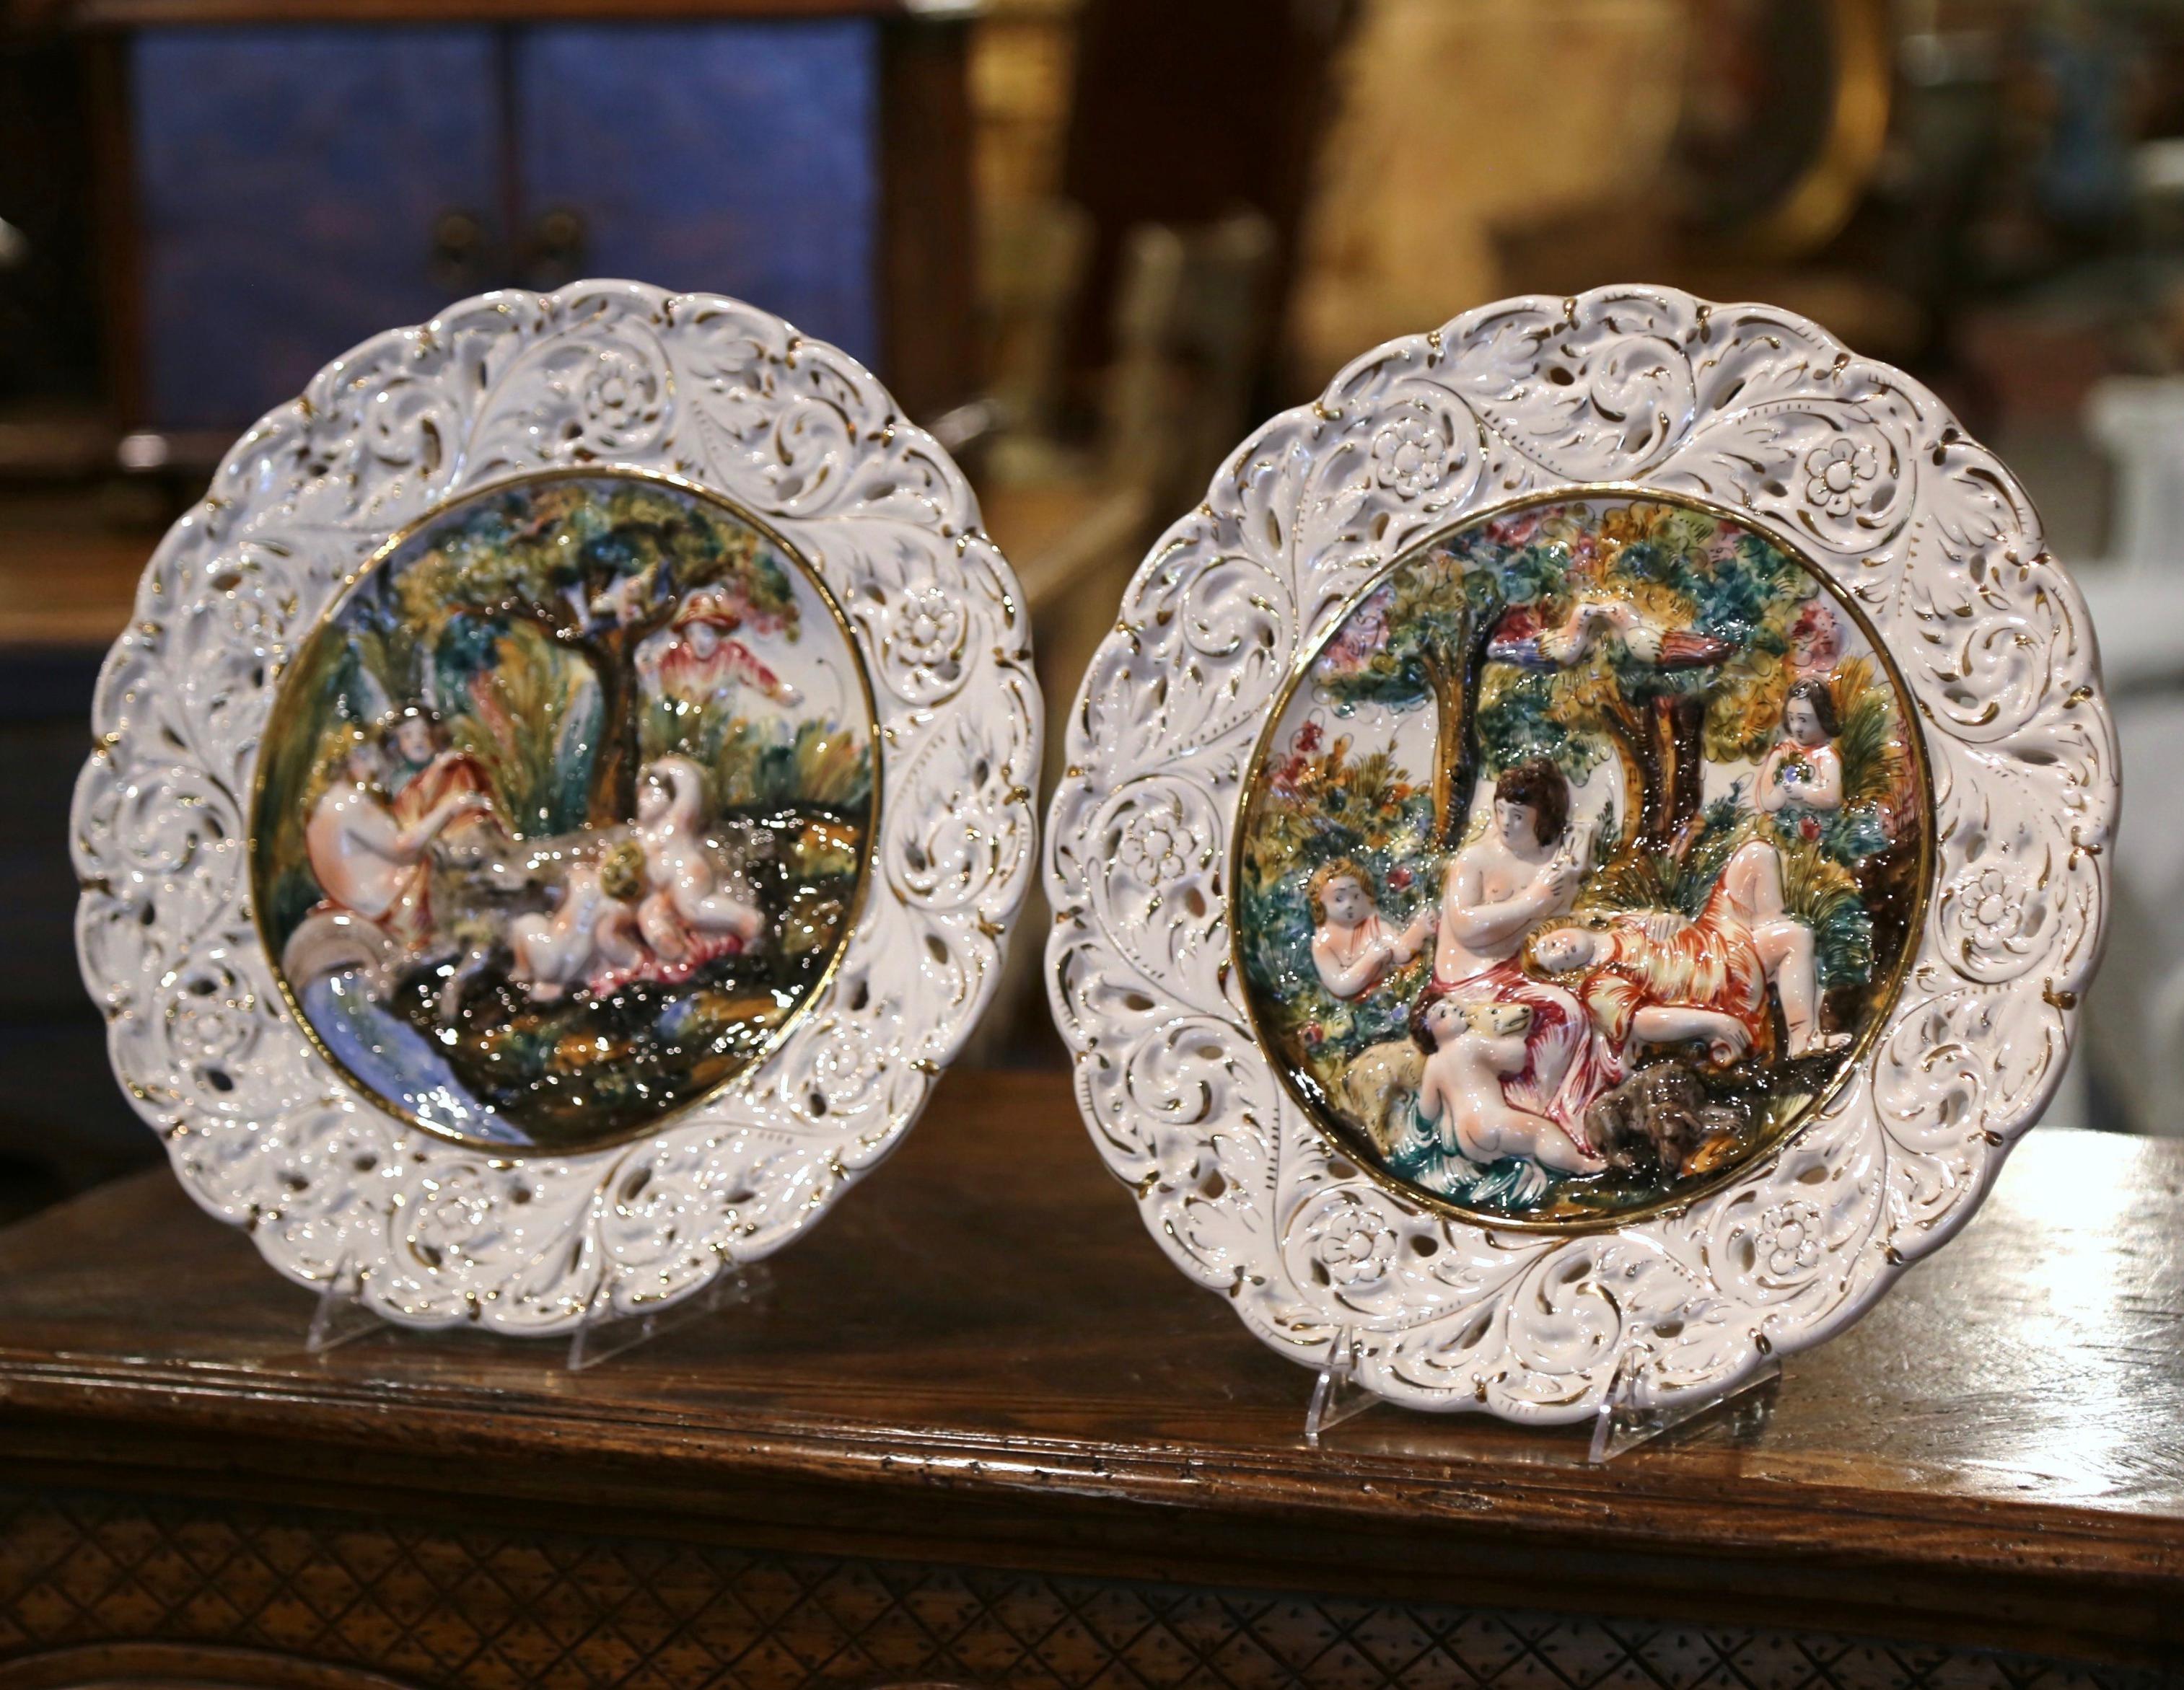 This beautiful pair of majolica wall plates would elevate any living room, kitchen, or dining room wall. Created in Italy circa 1980 and done in the Capodimonte style with high relief, each barbotine plate depicts a group relaxing in the central